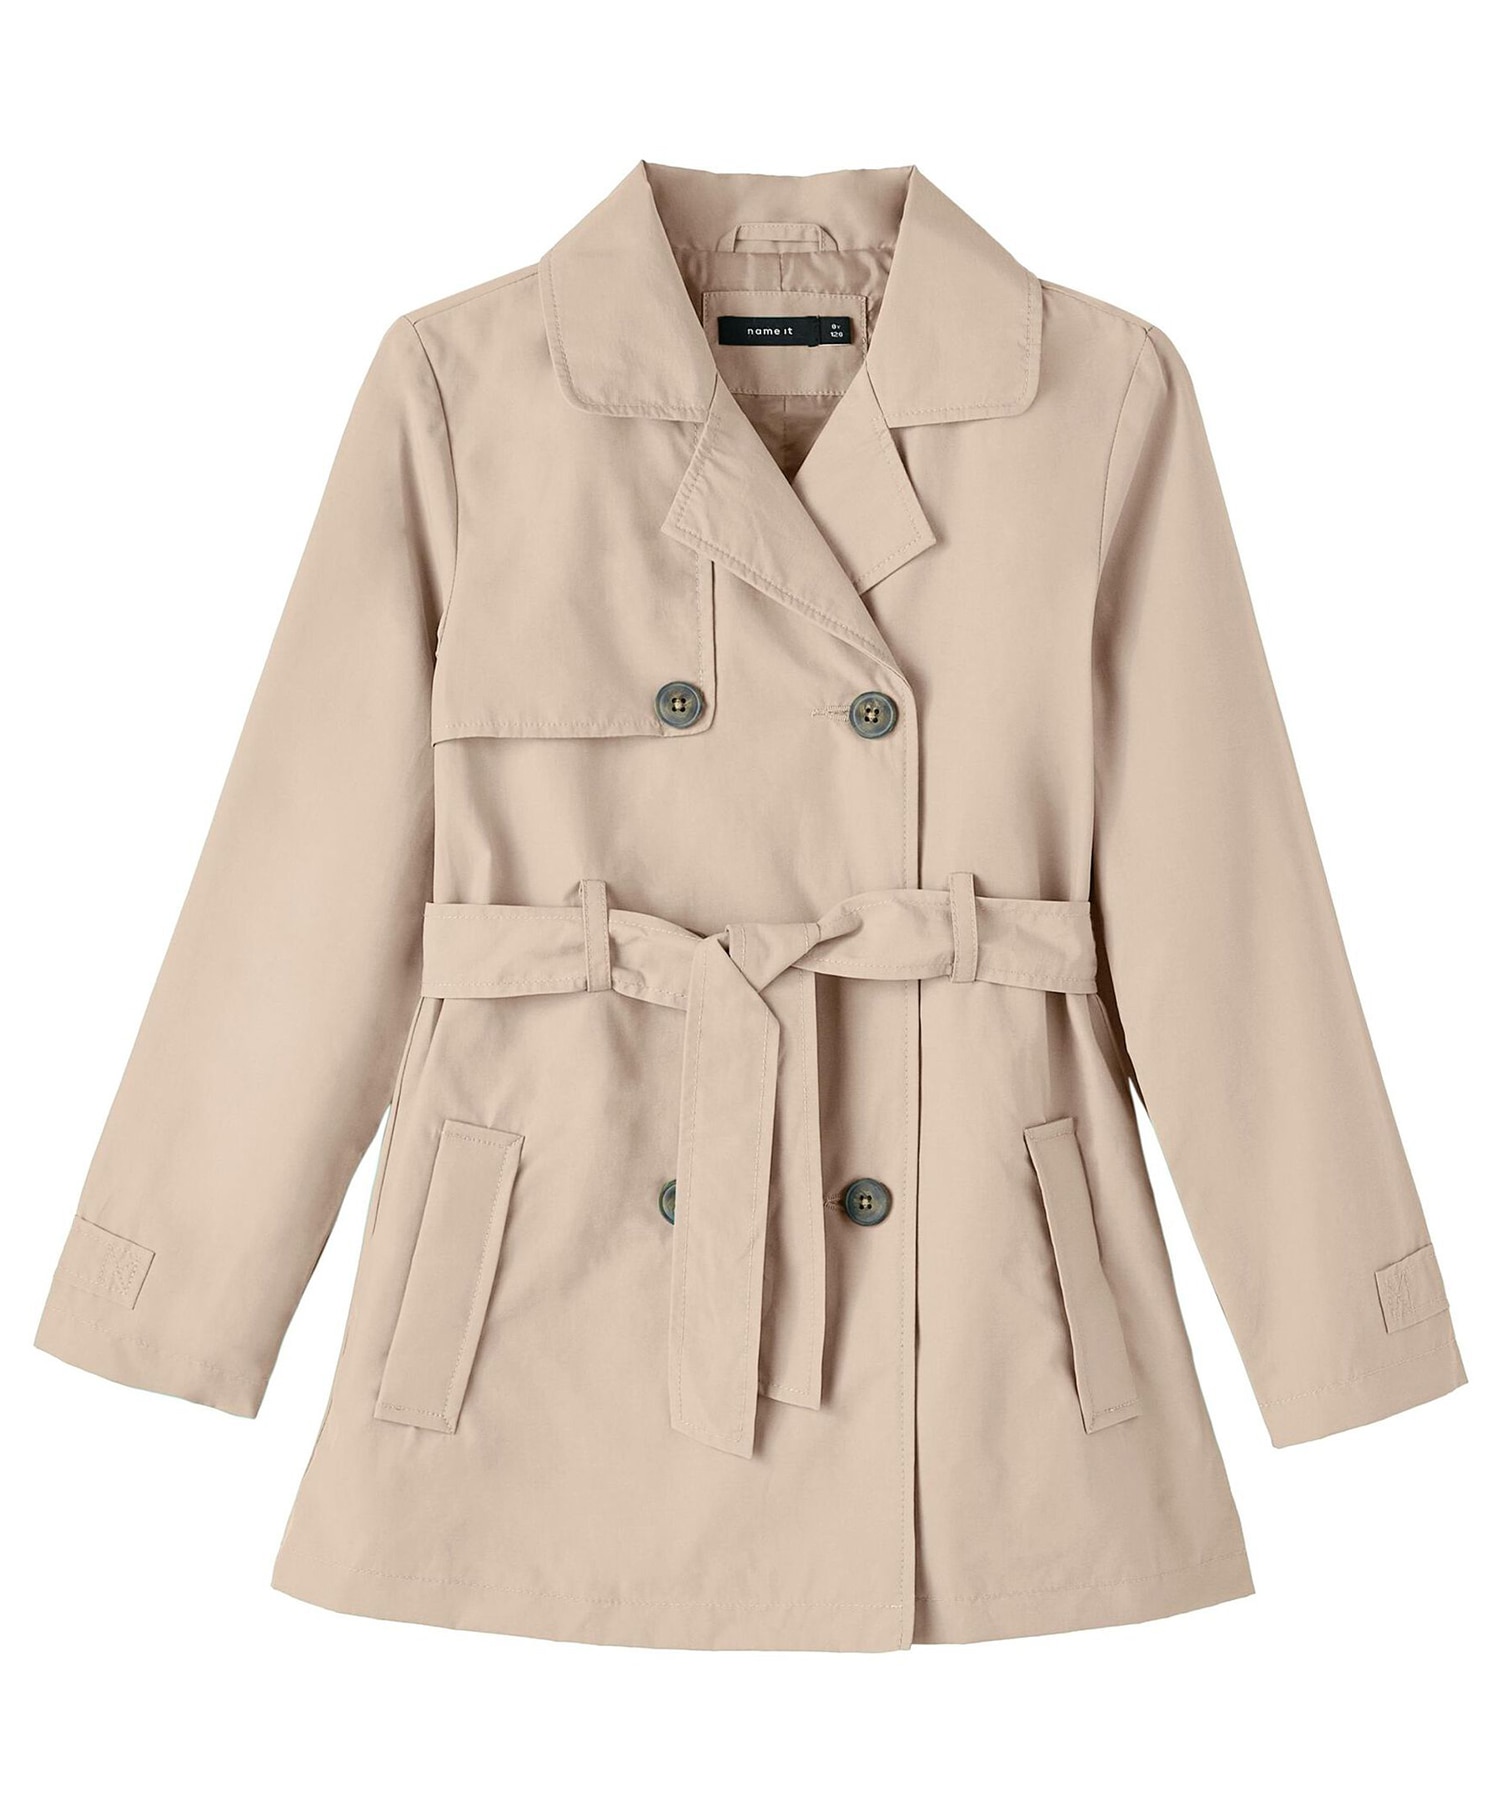 Name it - MADELINE Trench coat